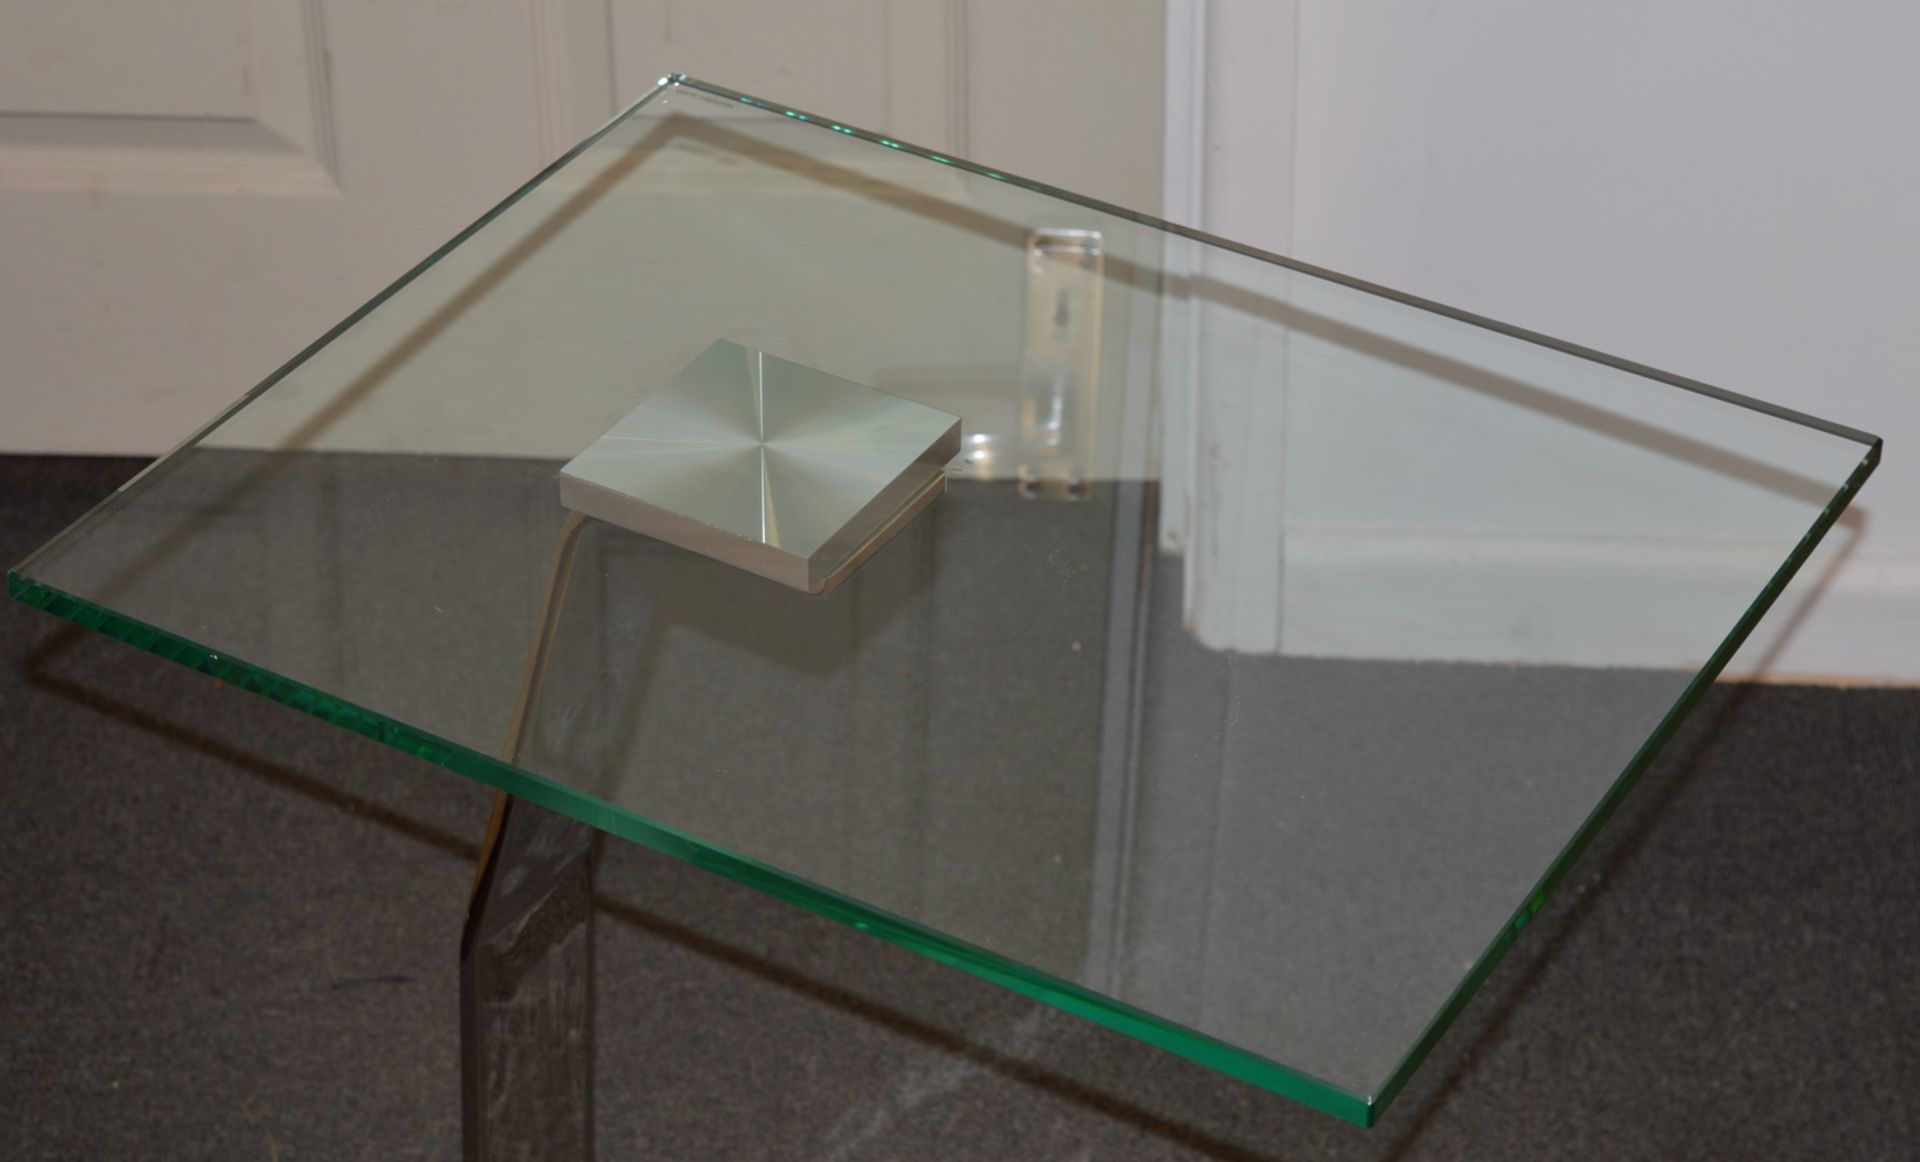 1 x Designer Chelsom Lamp Table - CL081 - Chrome Base With Clear Tempered Glass Top - Stunning - Image 4 of 6